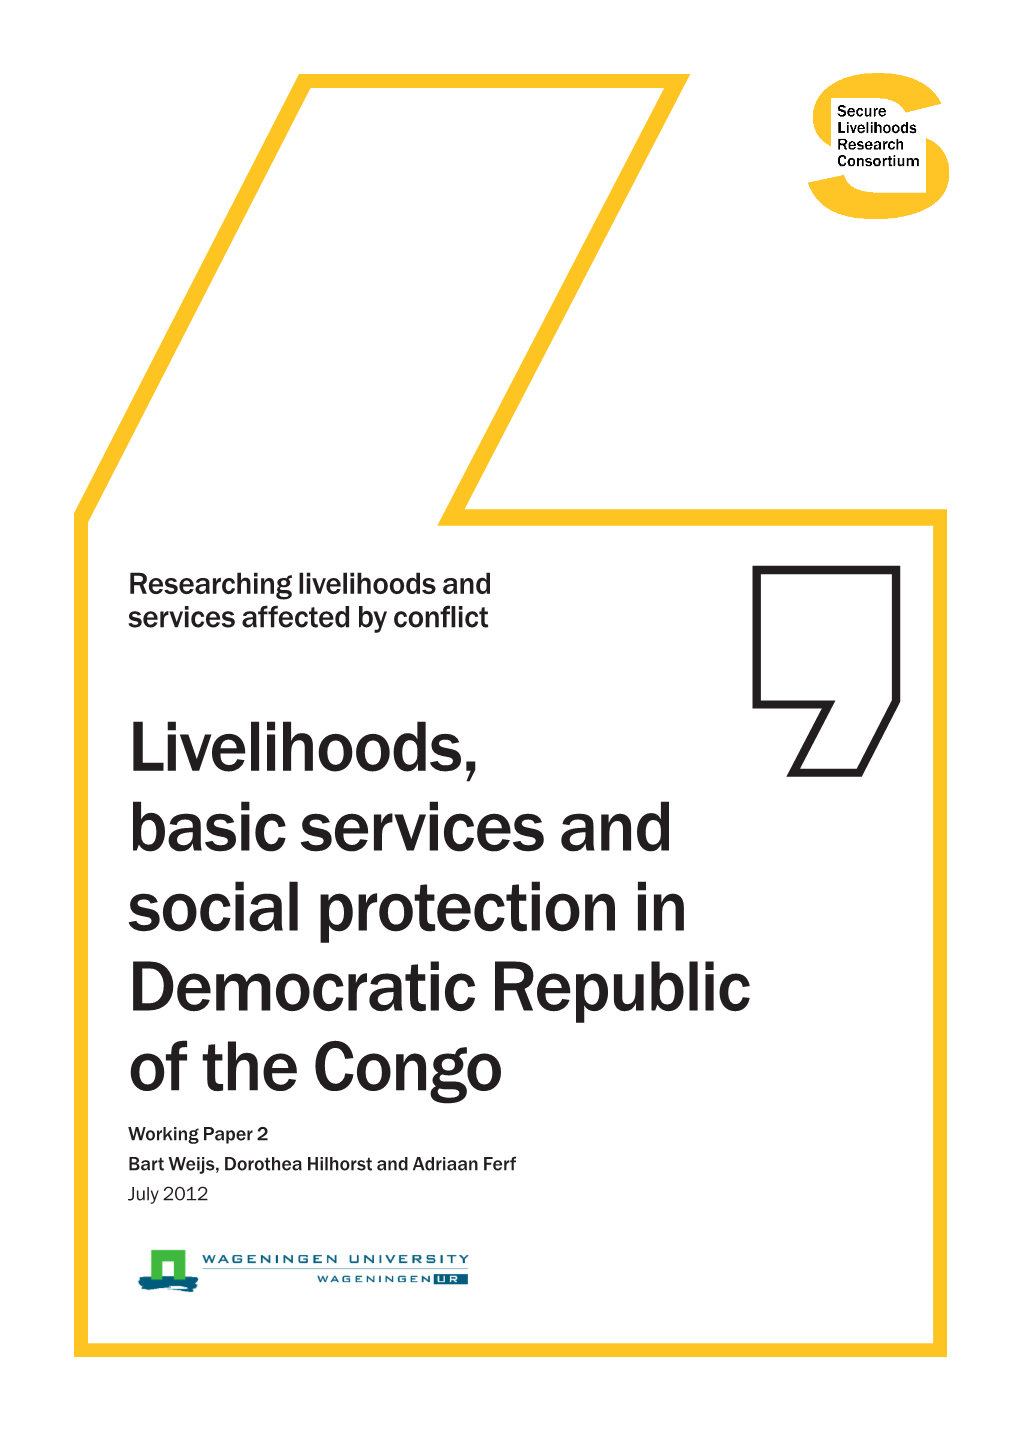 Livelihoods, Basic Services and Social Protection in Democratic Republic of the Congo